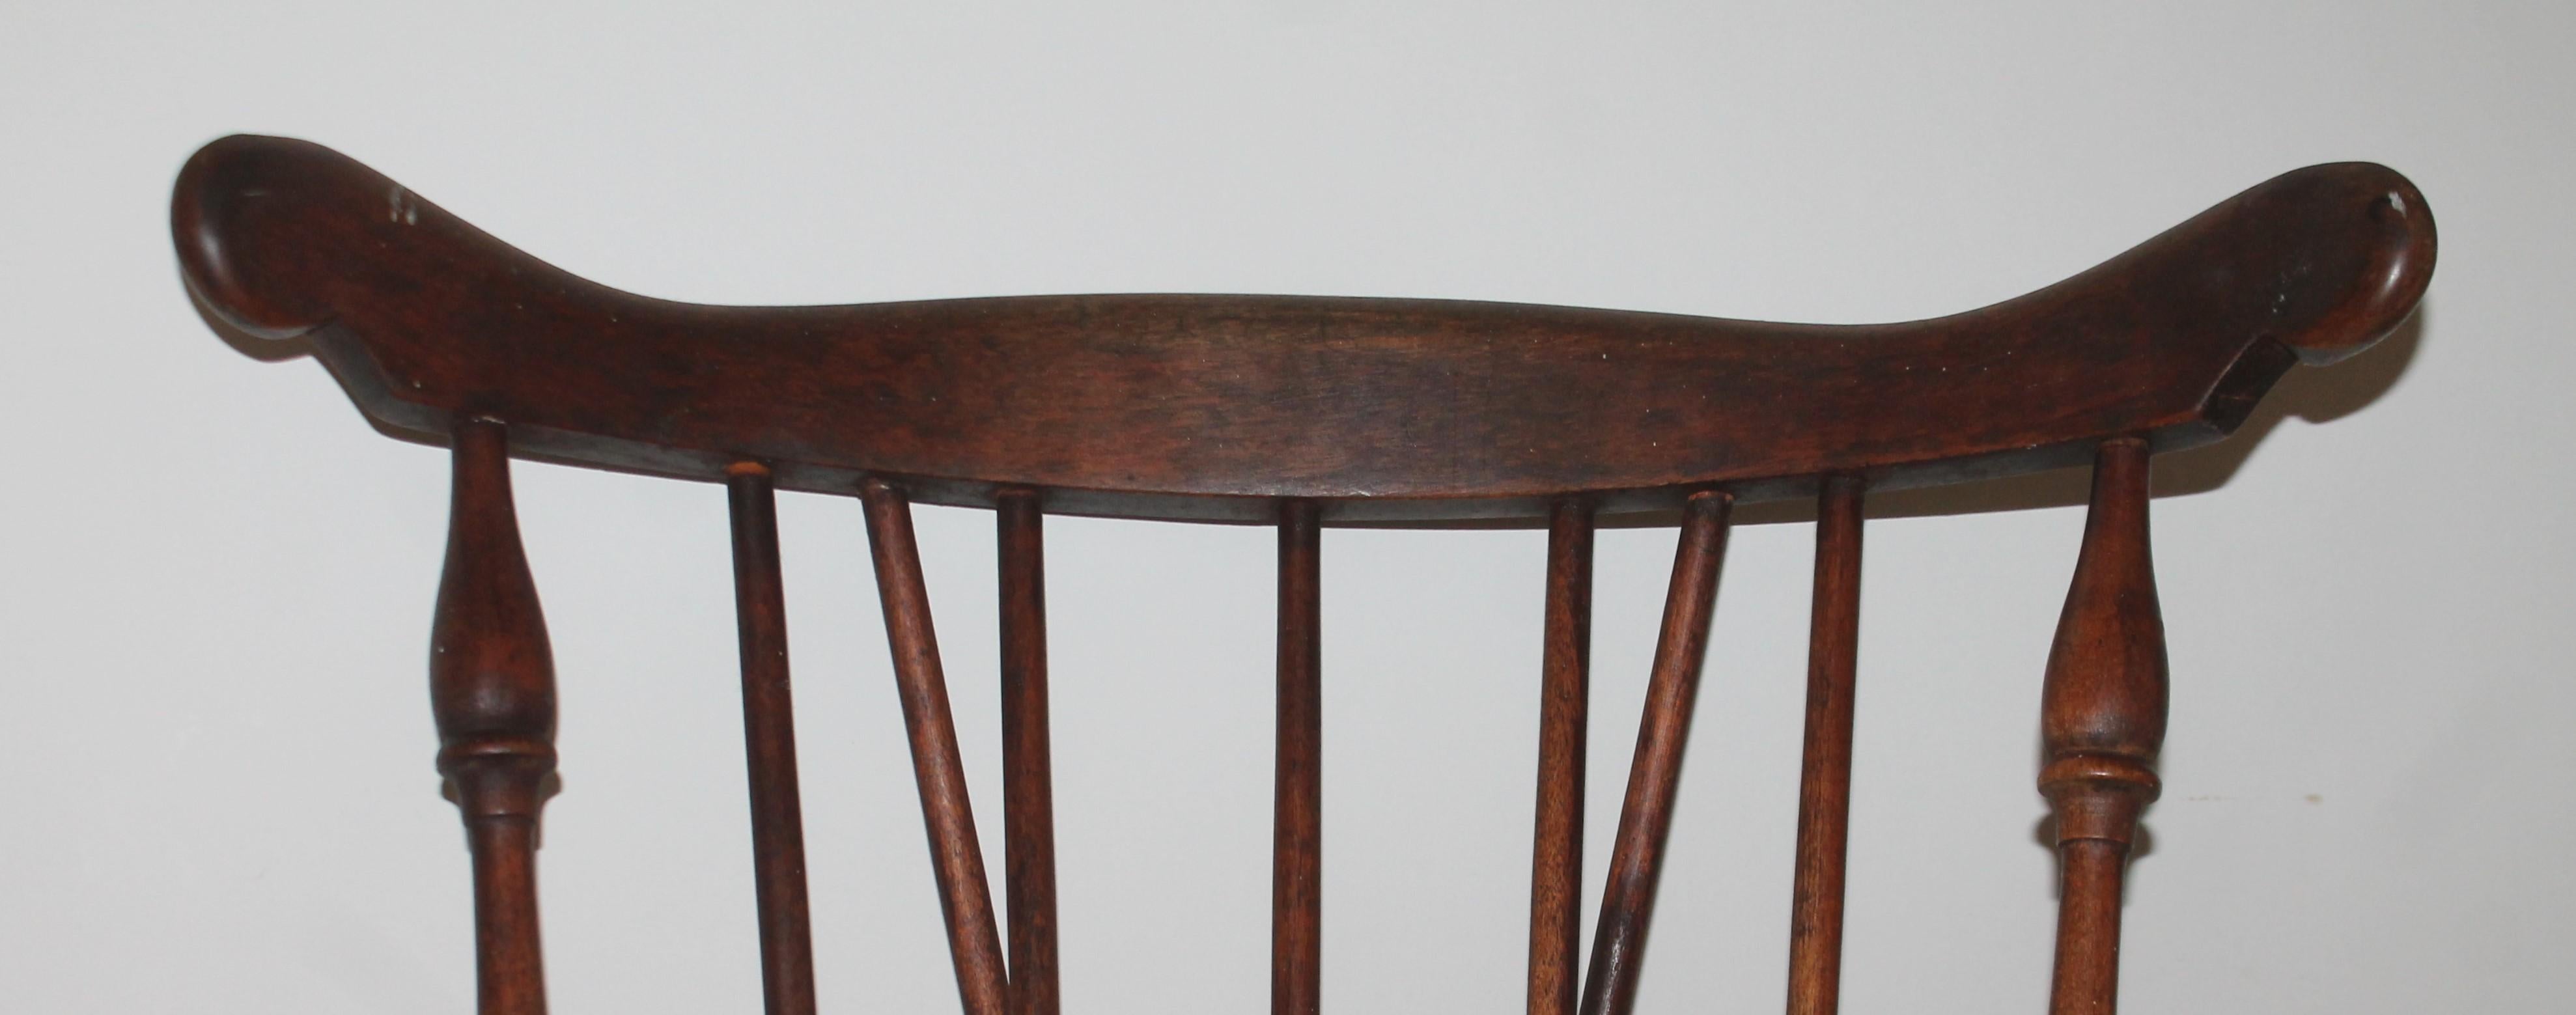 American 19th Century Brace Back Windsor Chair with Saddle Seat